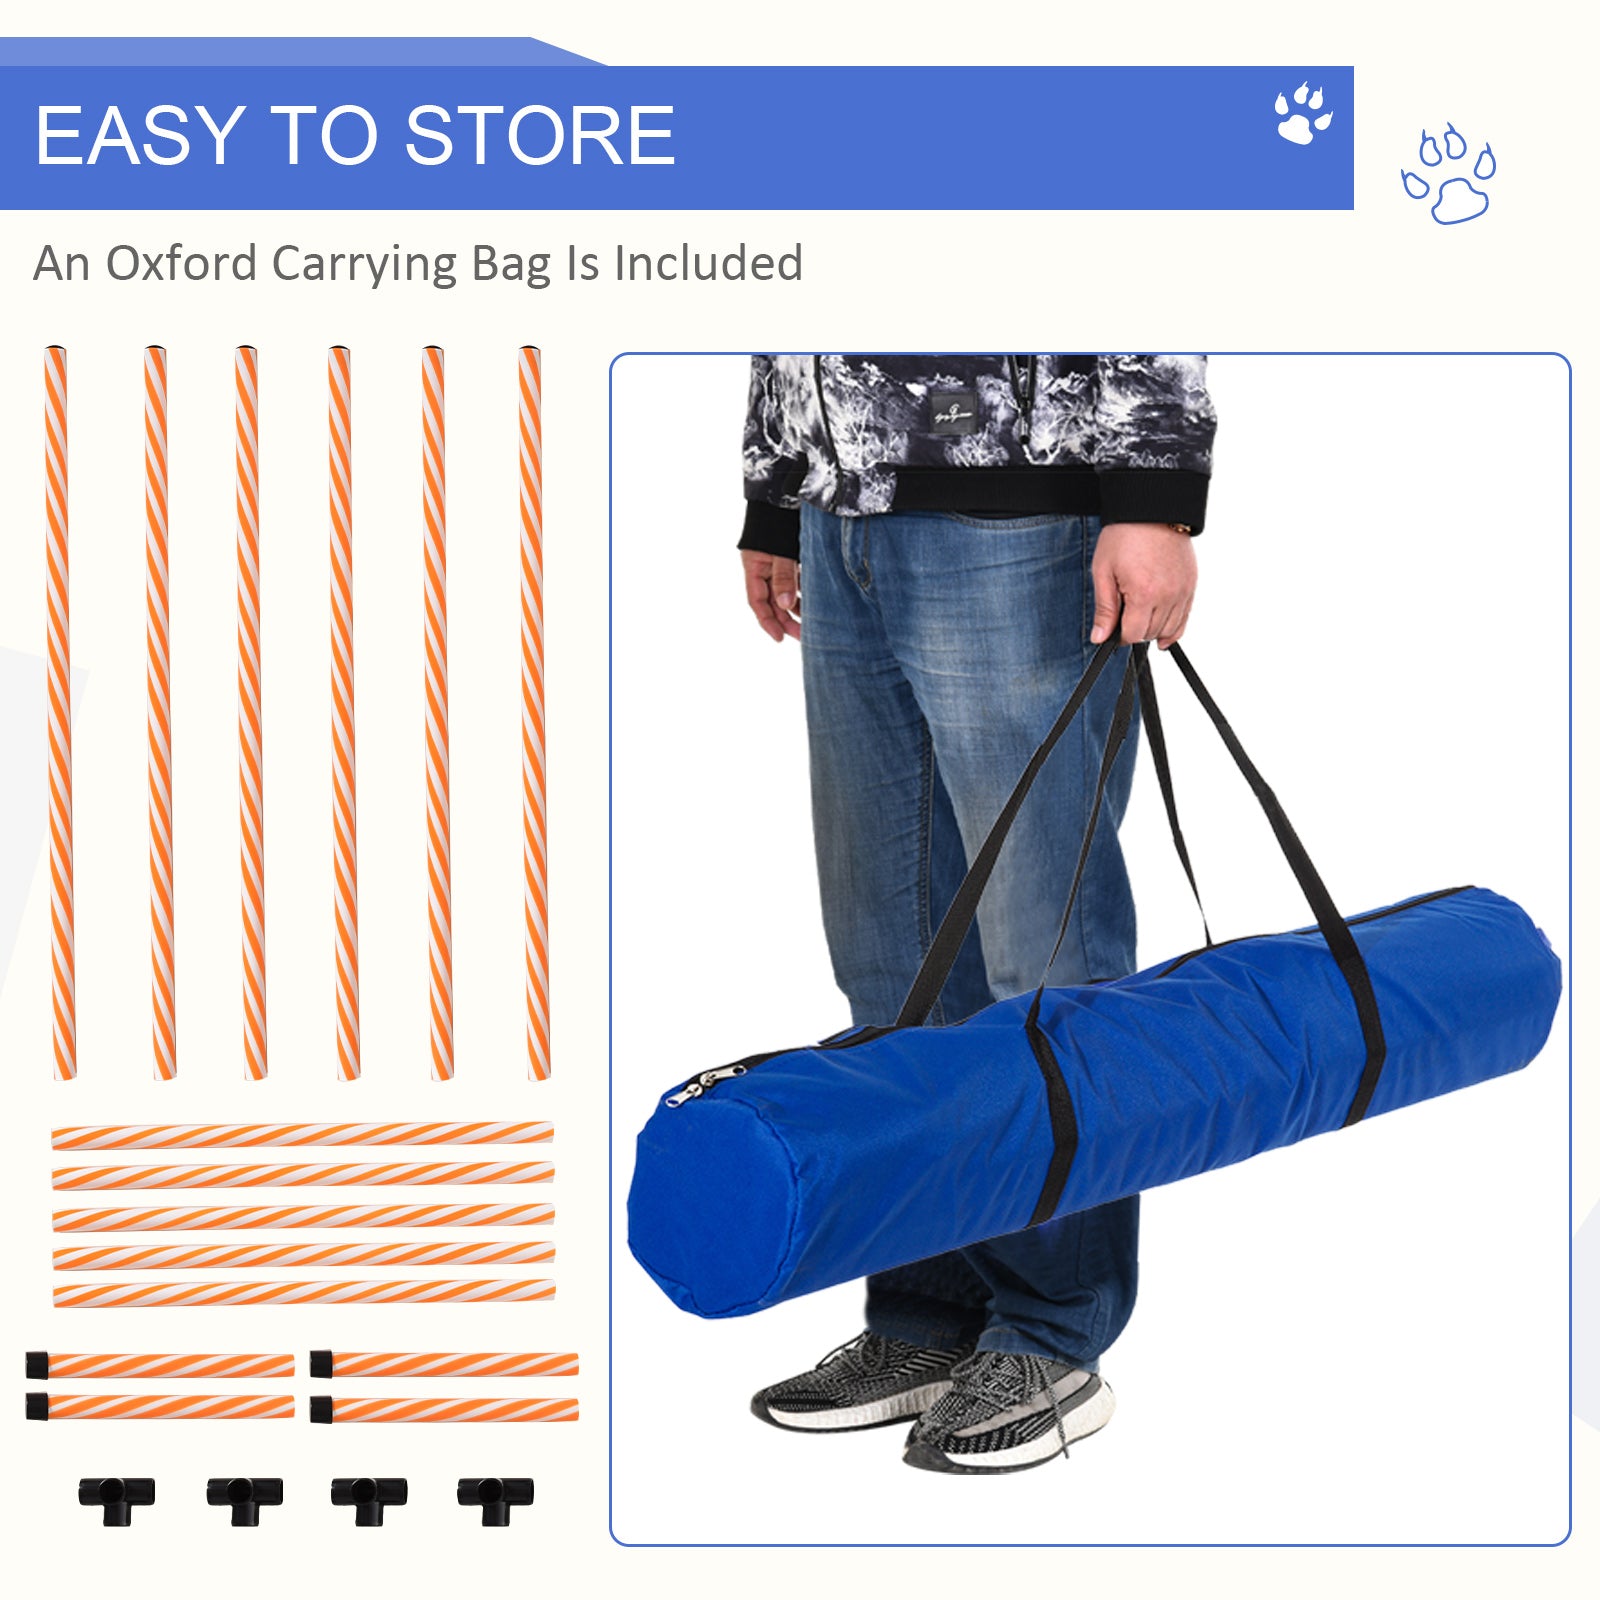 PawHut Dog Agility Weave Poles Training Obstacle Course Set Slalom Equipment Outdoor Indoor with Oxford Bag - Inspirely